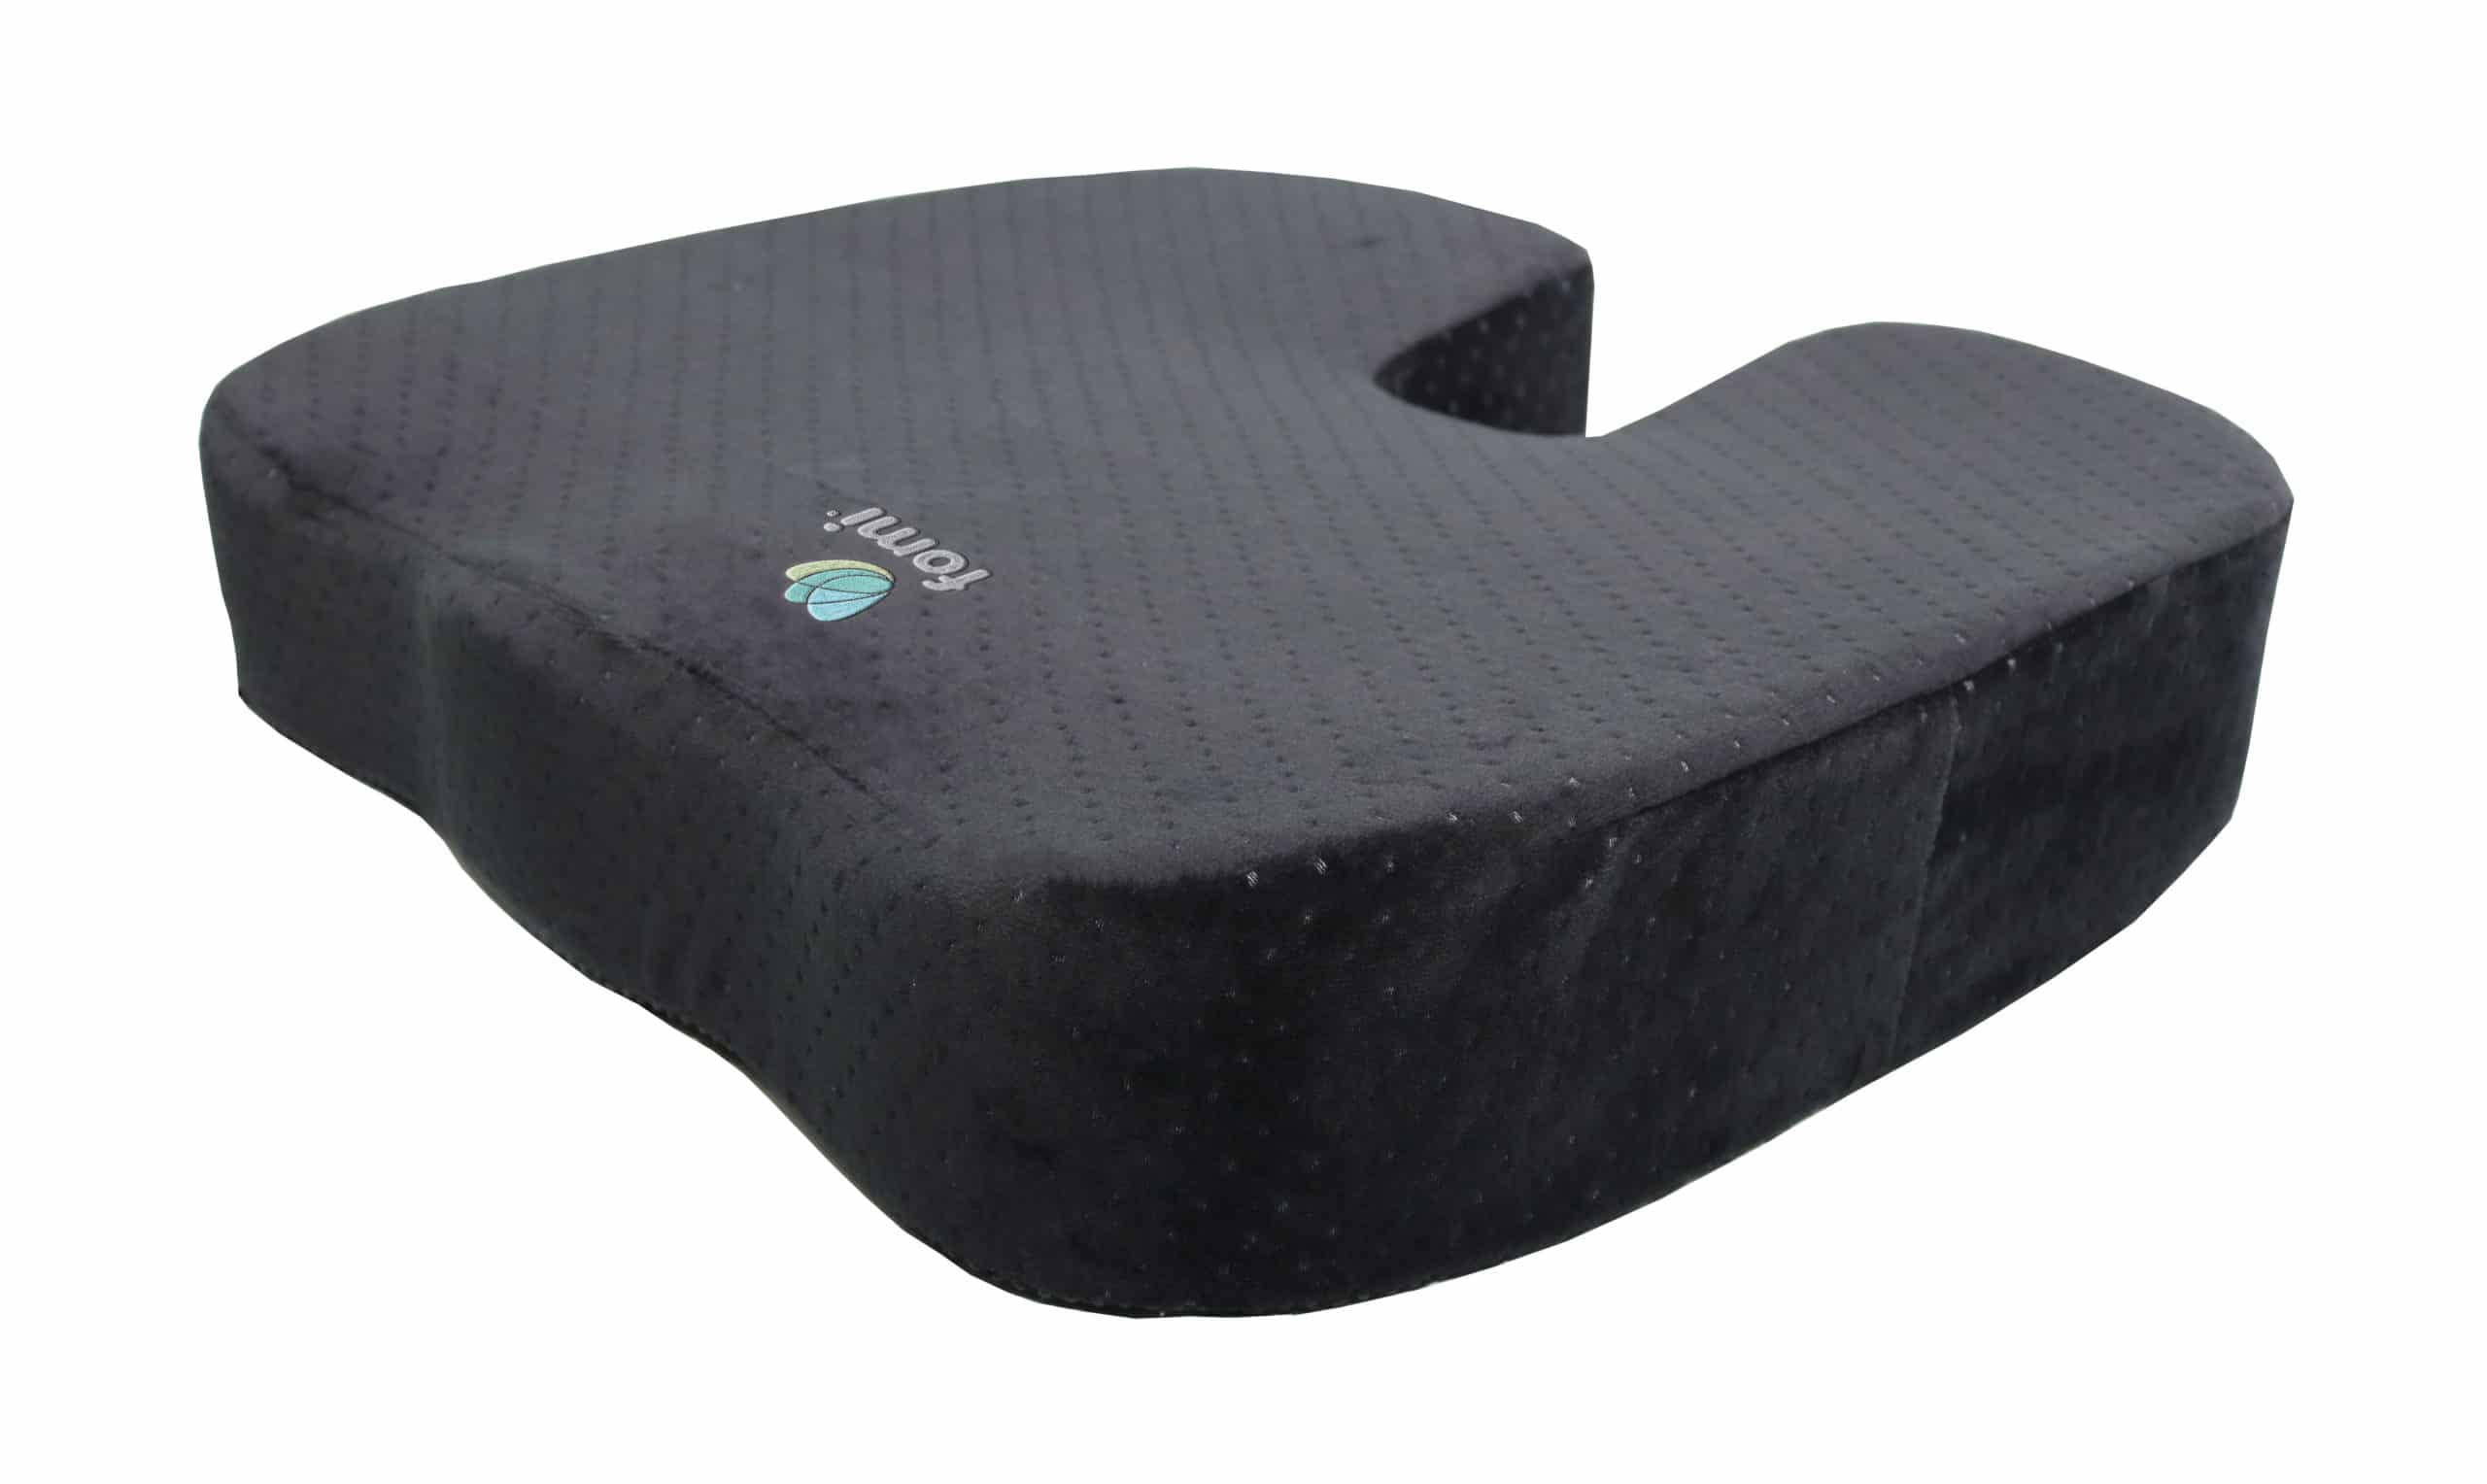 https://www.fomicare.com/wp-content/uploads/2020/03/Large-Coccyx-Cushion-Memory-Foam-scaled.jpg